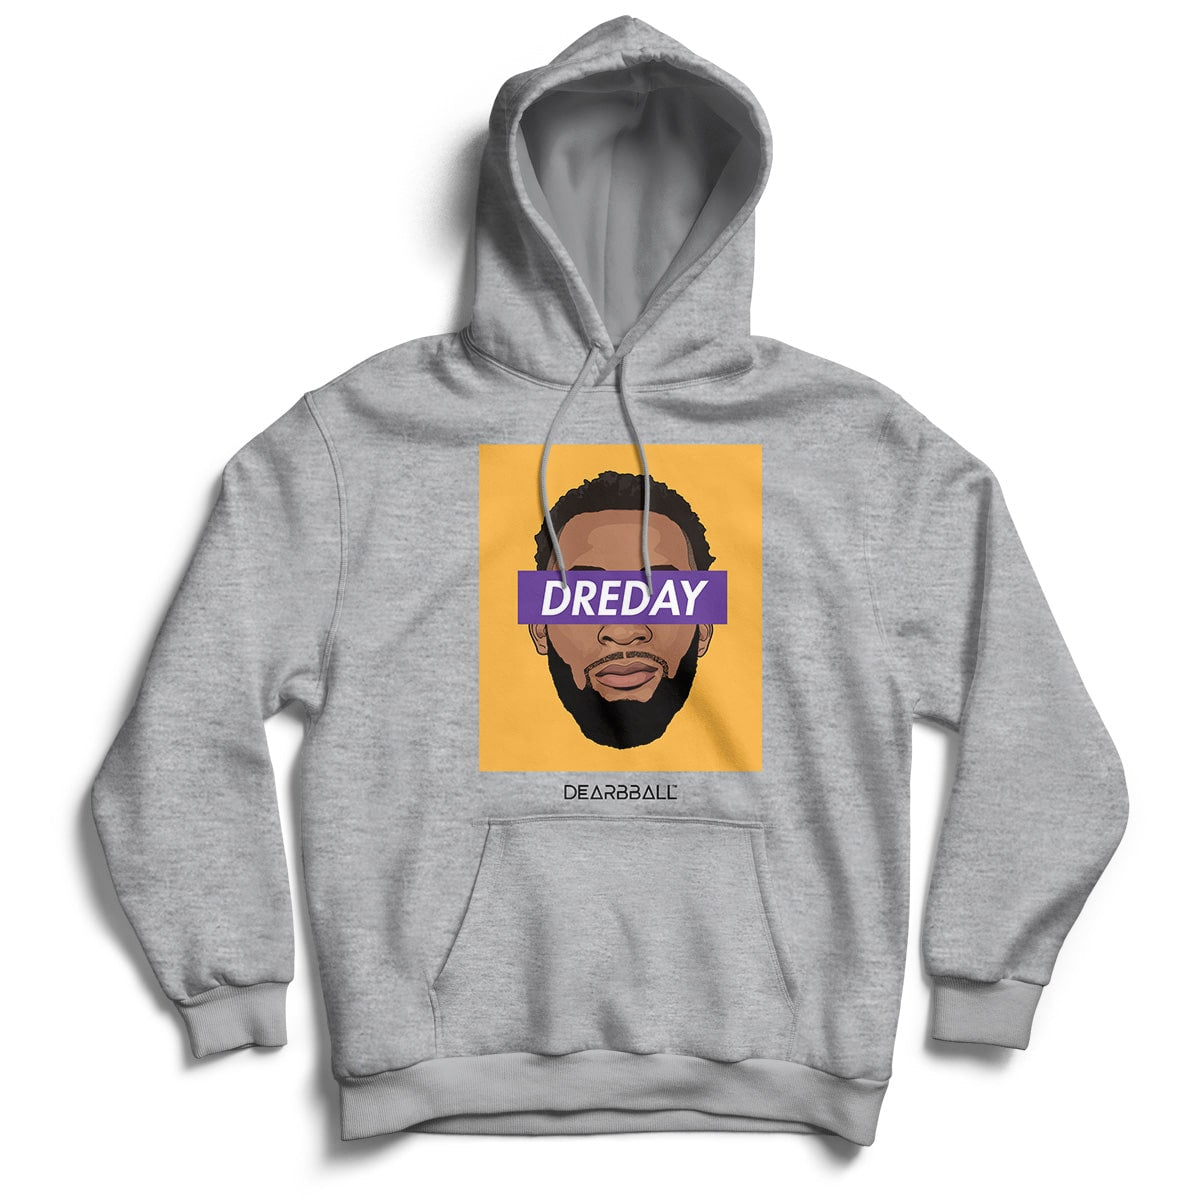 Andre Drummond Sweat à Capuche Bio - DRE DAY Yellow Los Angeles Lakers Basketball Dearbball blanc